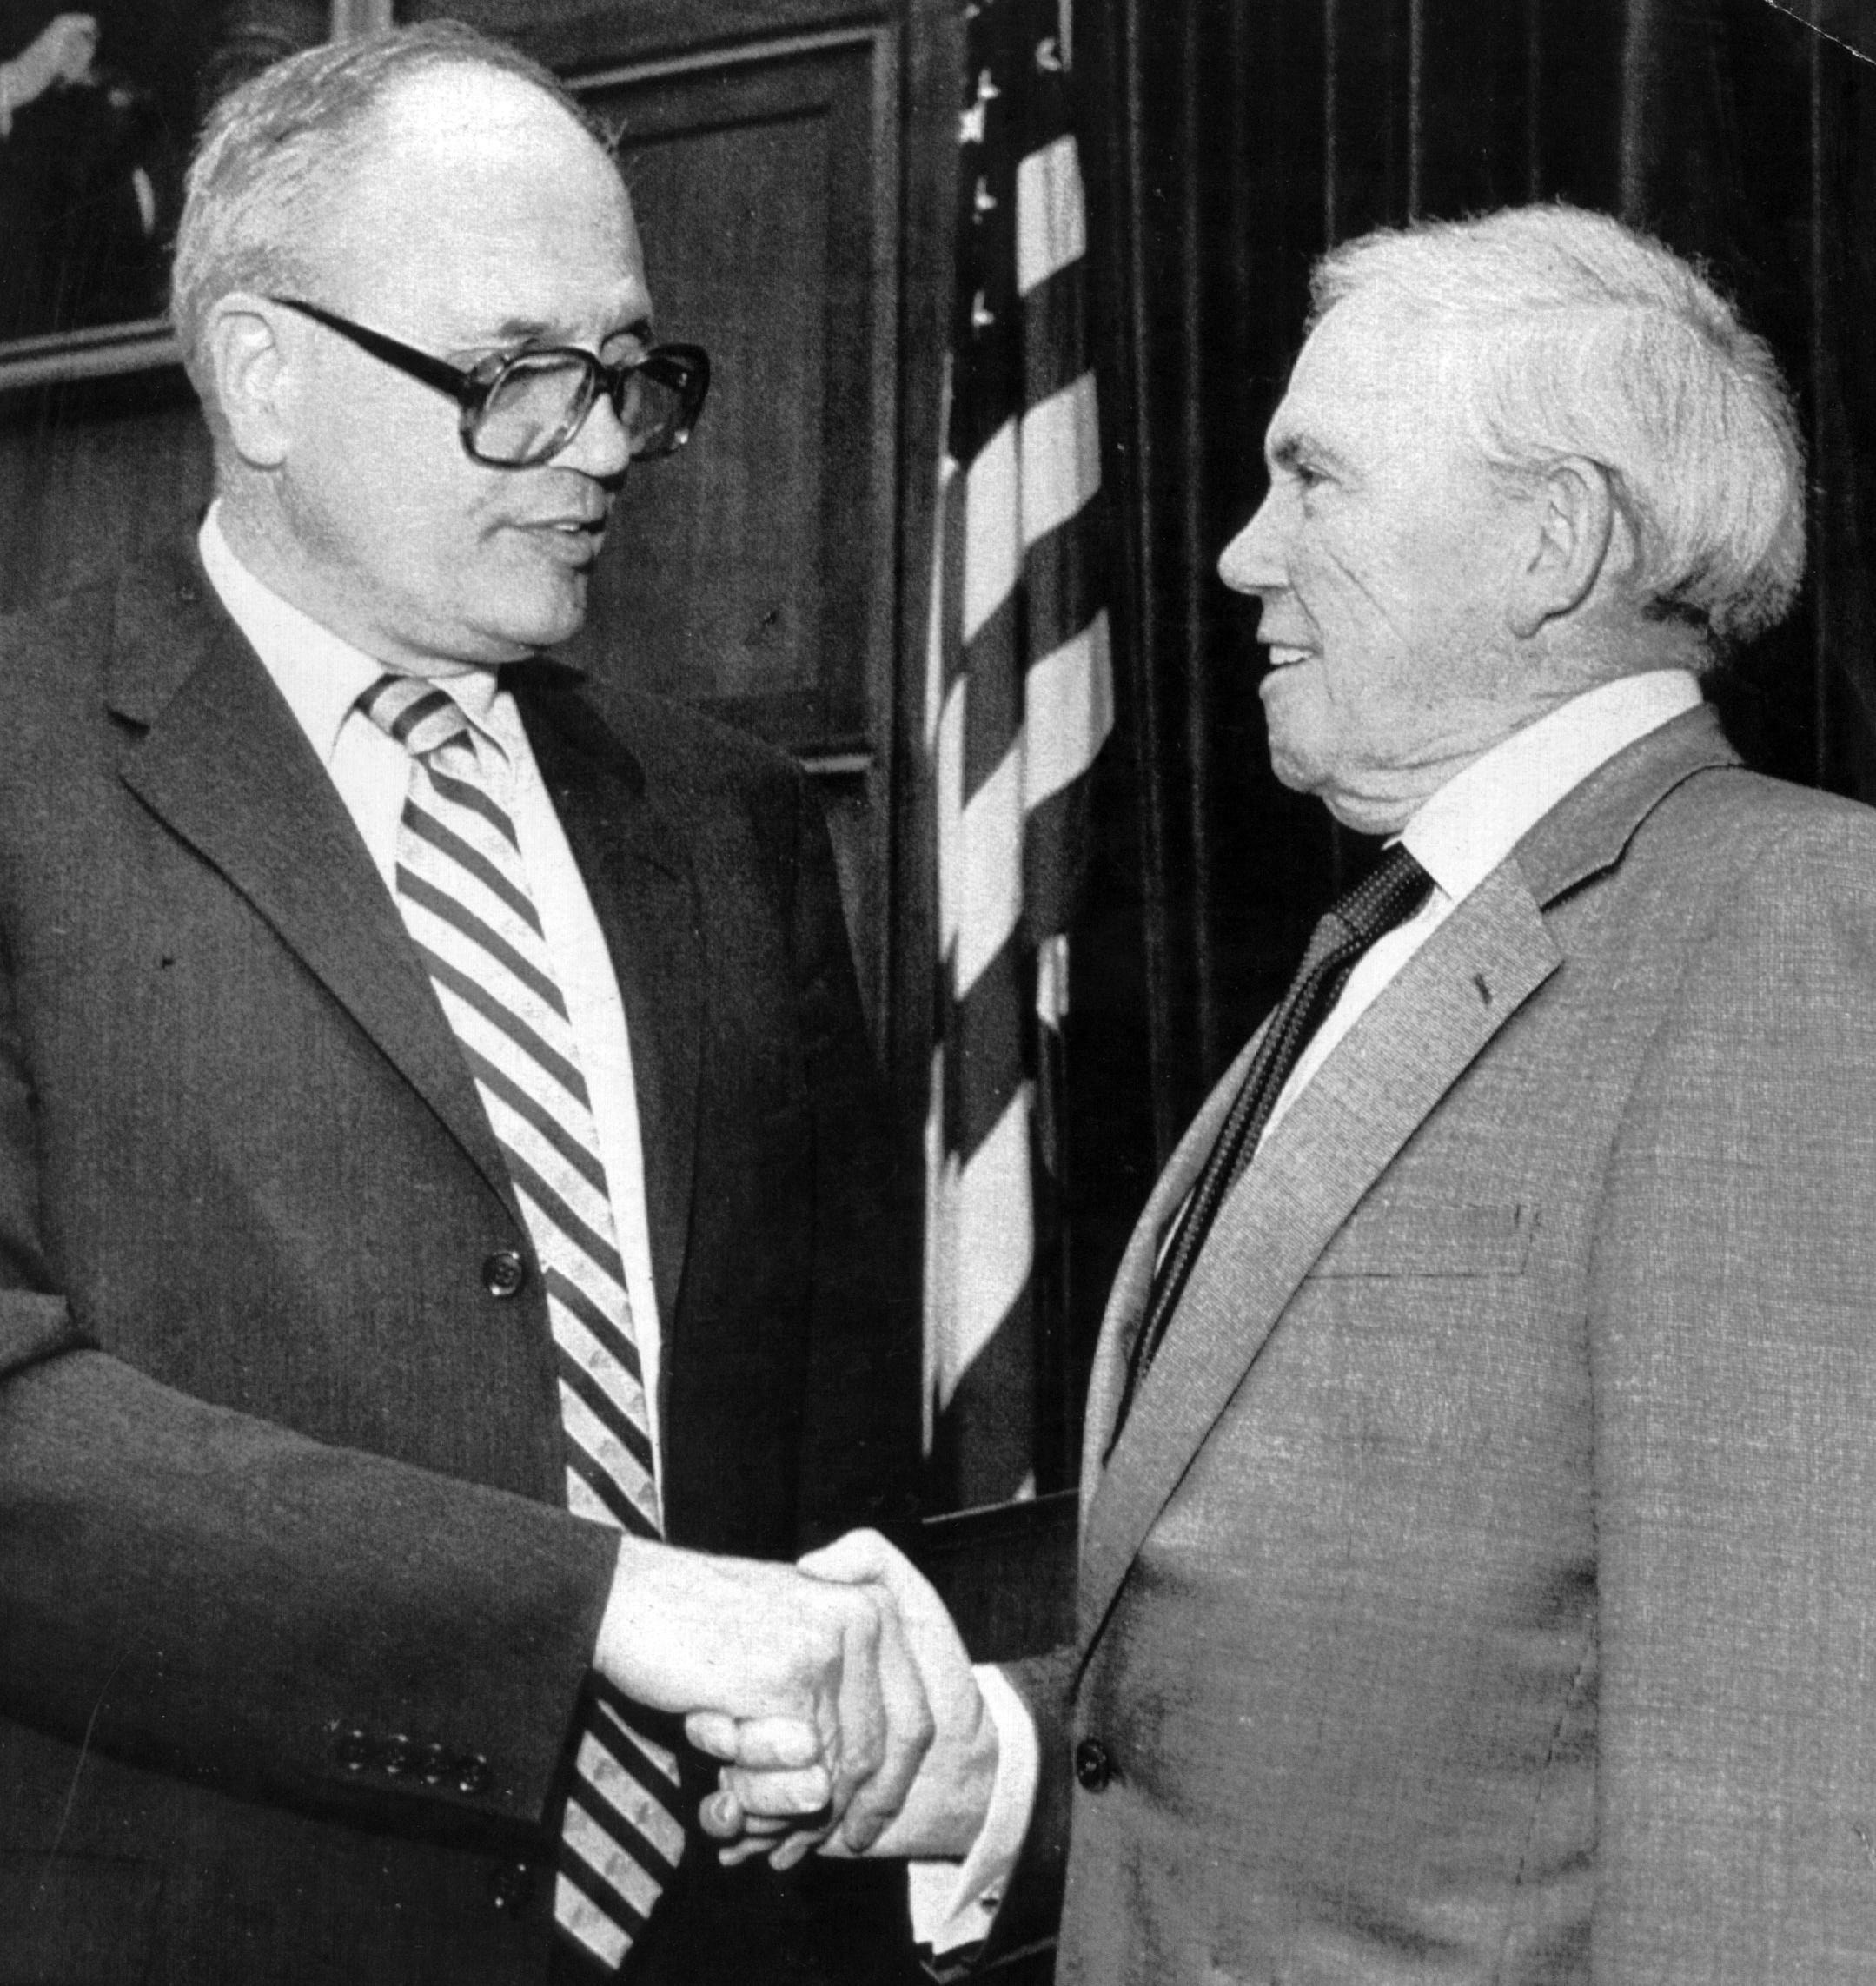 United Auto Workers president Douglas Fraser, right, shakes hands with Rep. John Dingell, chairman of the House Committee on Energy and Commerce, prior to a hearing Jan. 24, 1983 on the loss of health benefits due to unemployment.